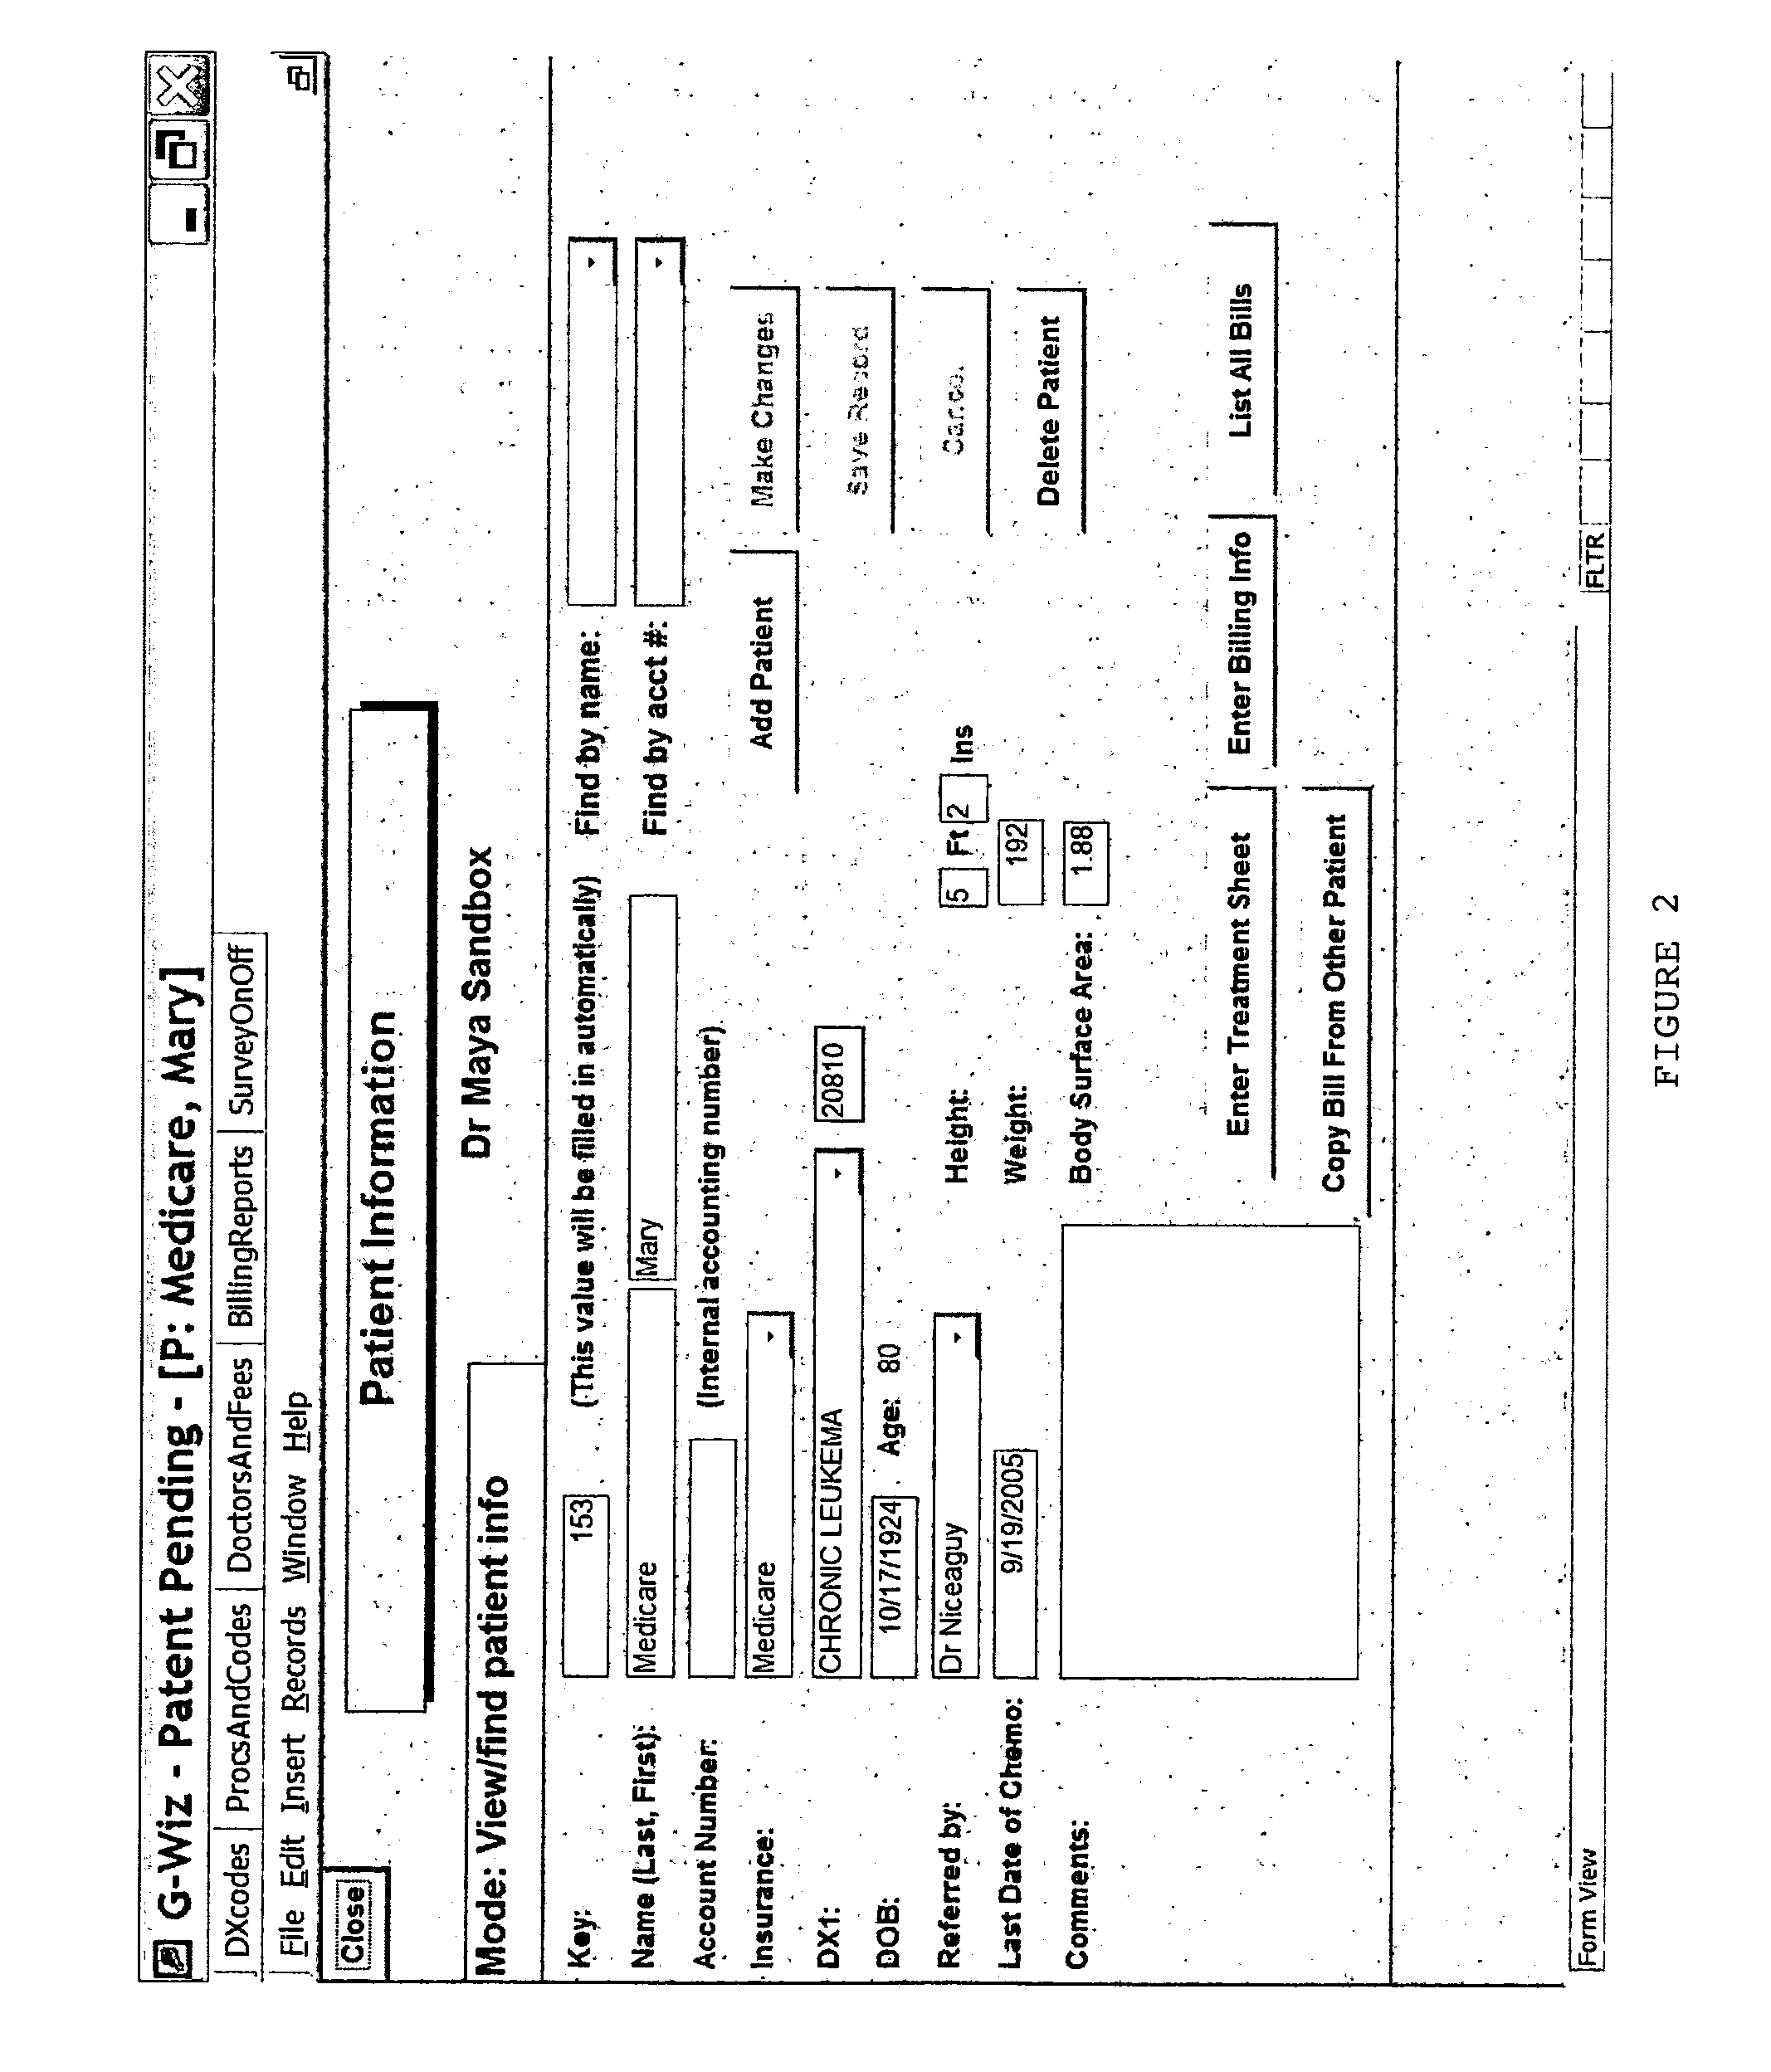 Method, system and computer program product for generating an electronic bill having optimized insurance claim items